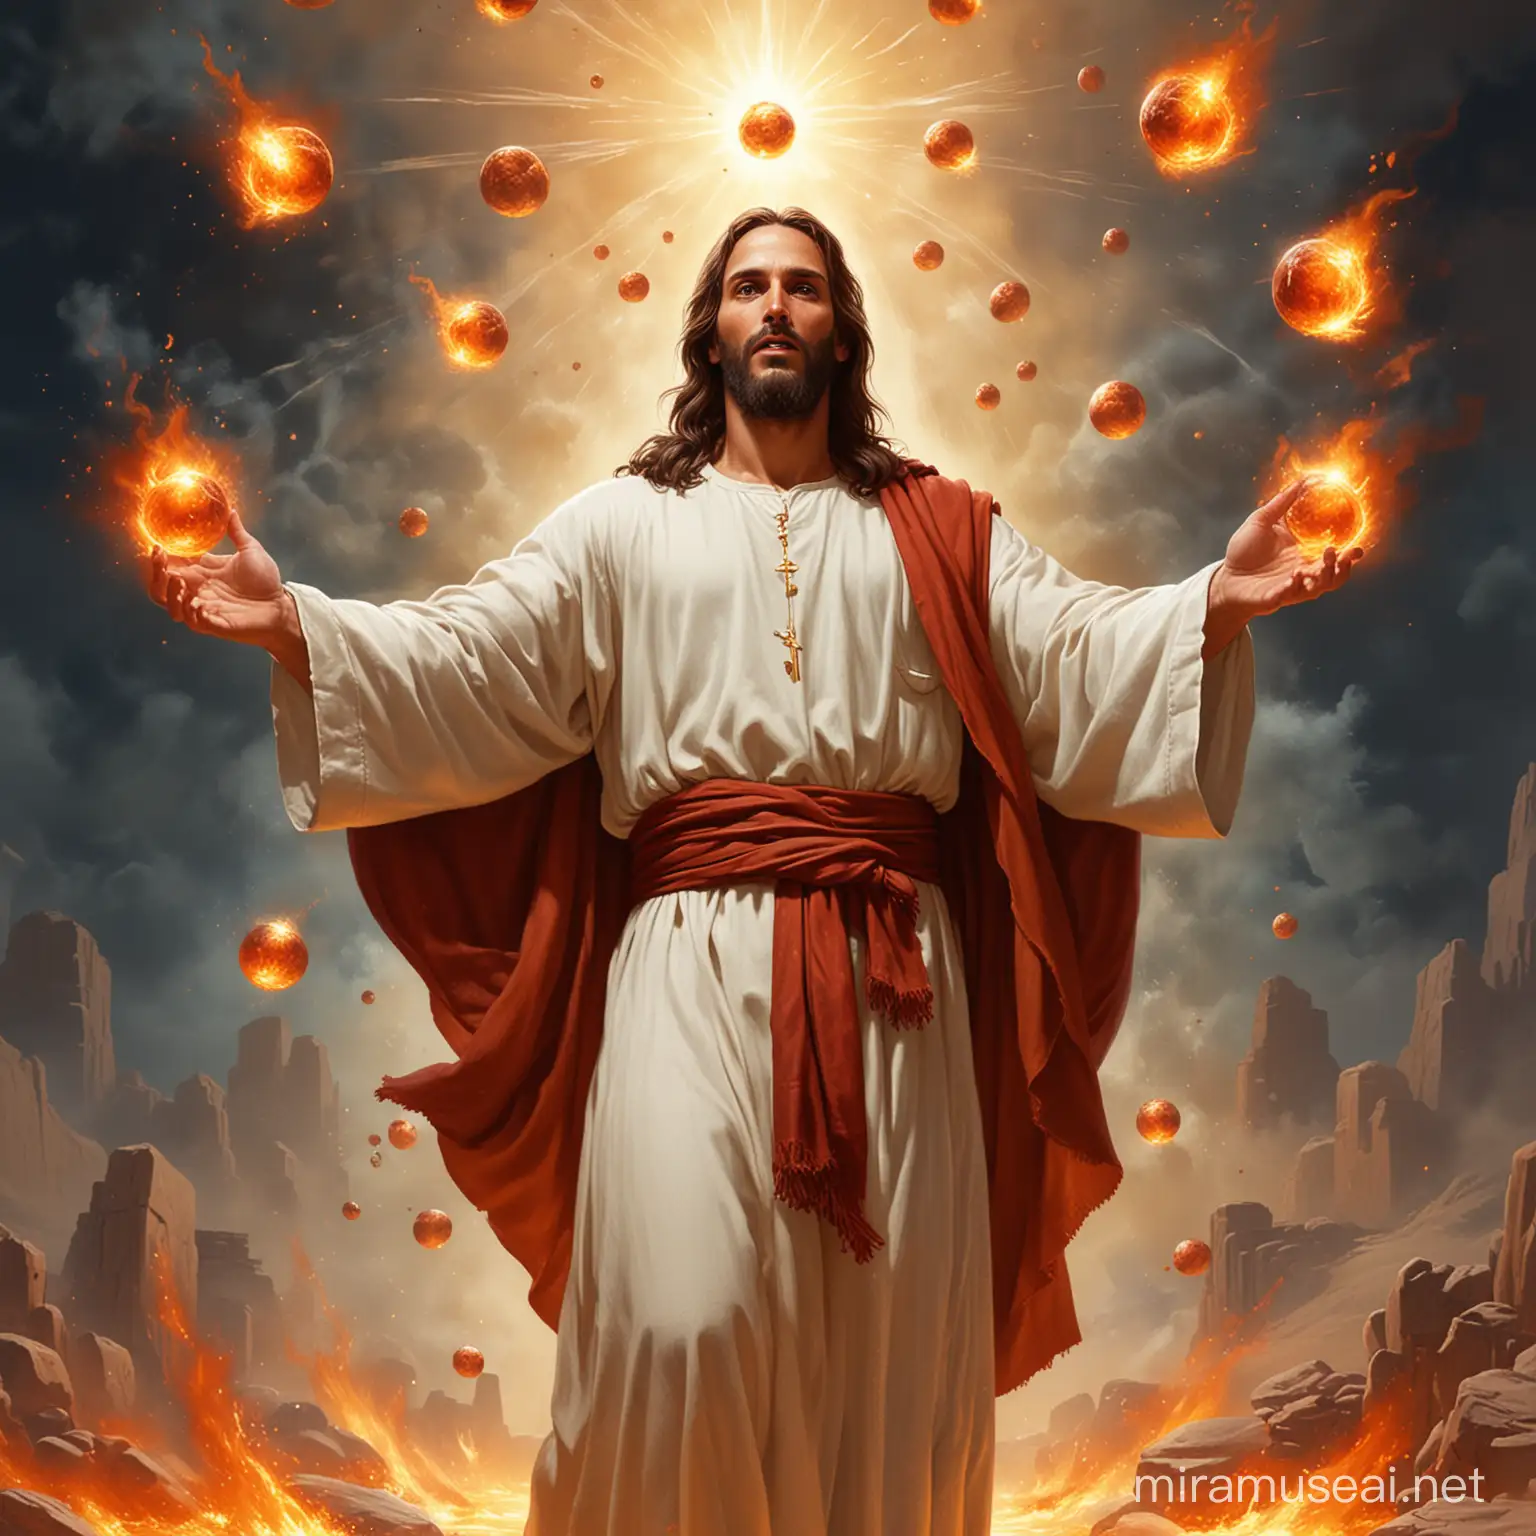 Fiery Jesus with seven fireballs object floating behind Him.